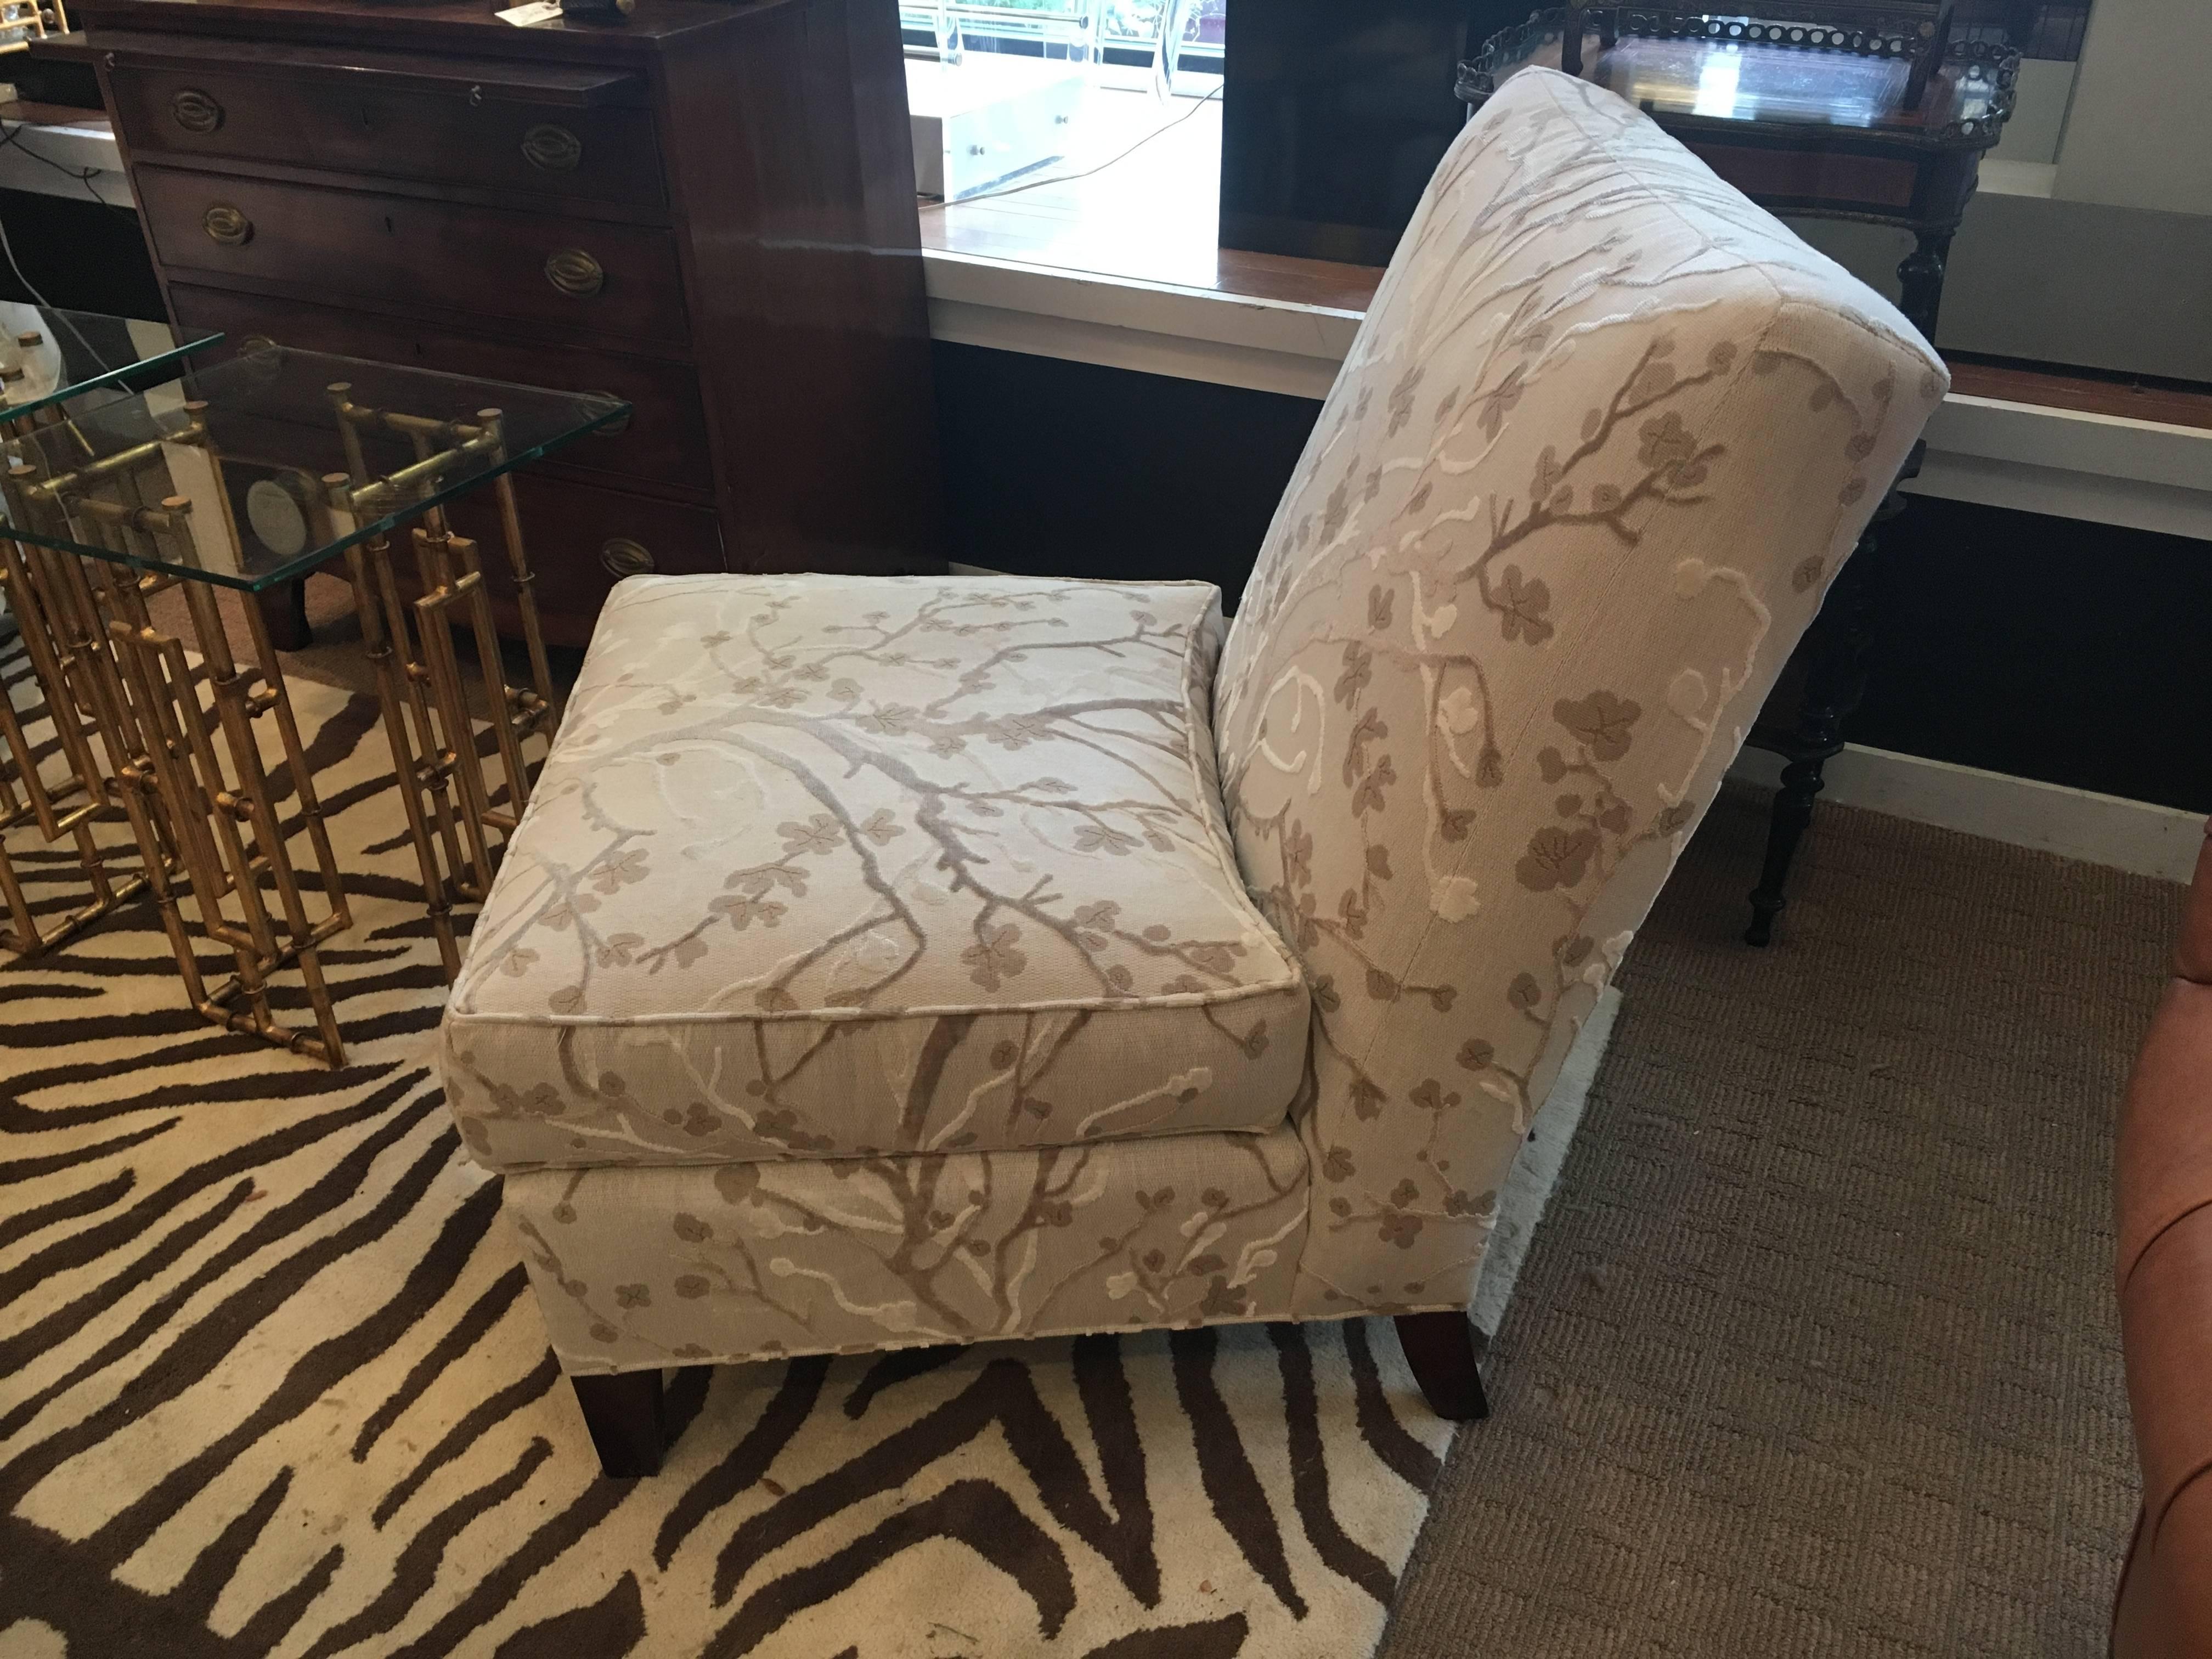 Sophisticated pair of slipper chairs in cherry blossom inspired fabric in shades of beige, taupe and white. Ebonized feet. Seat height 18